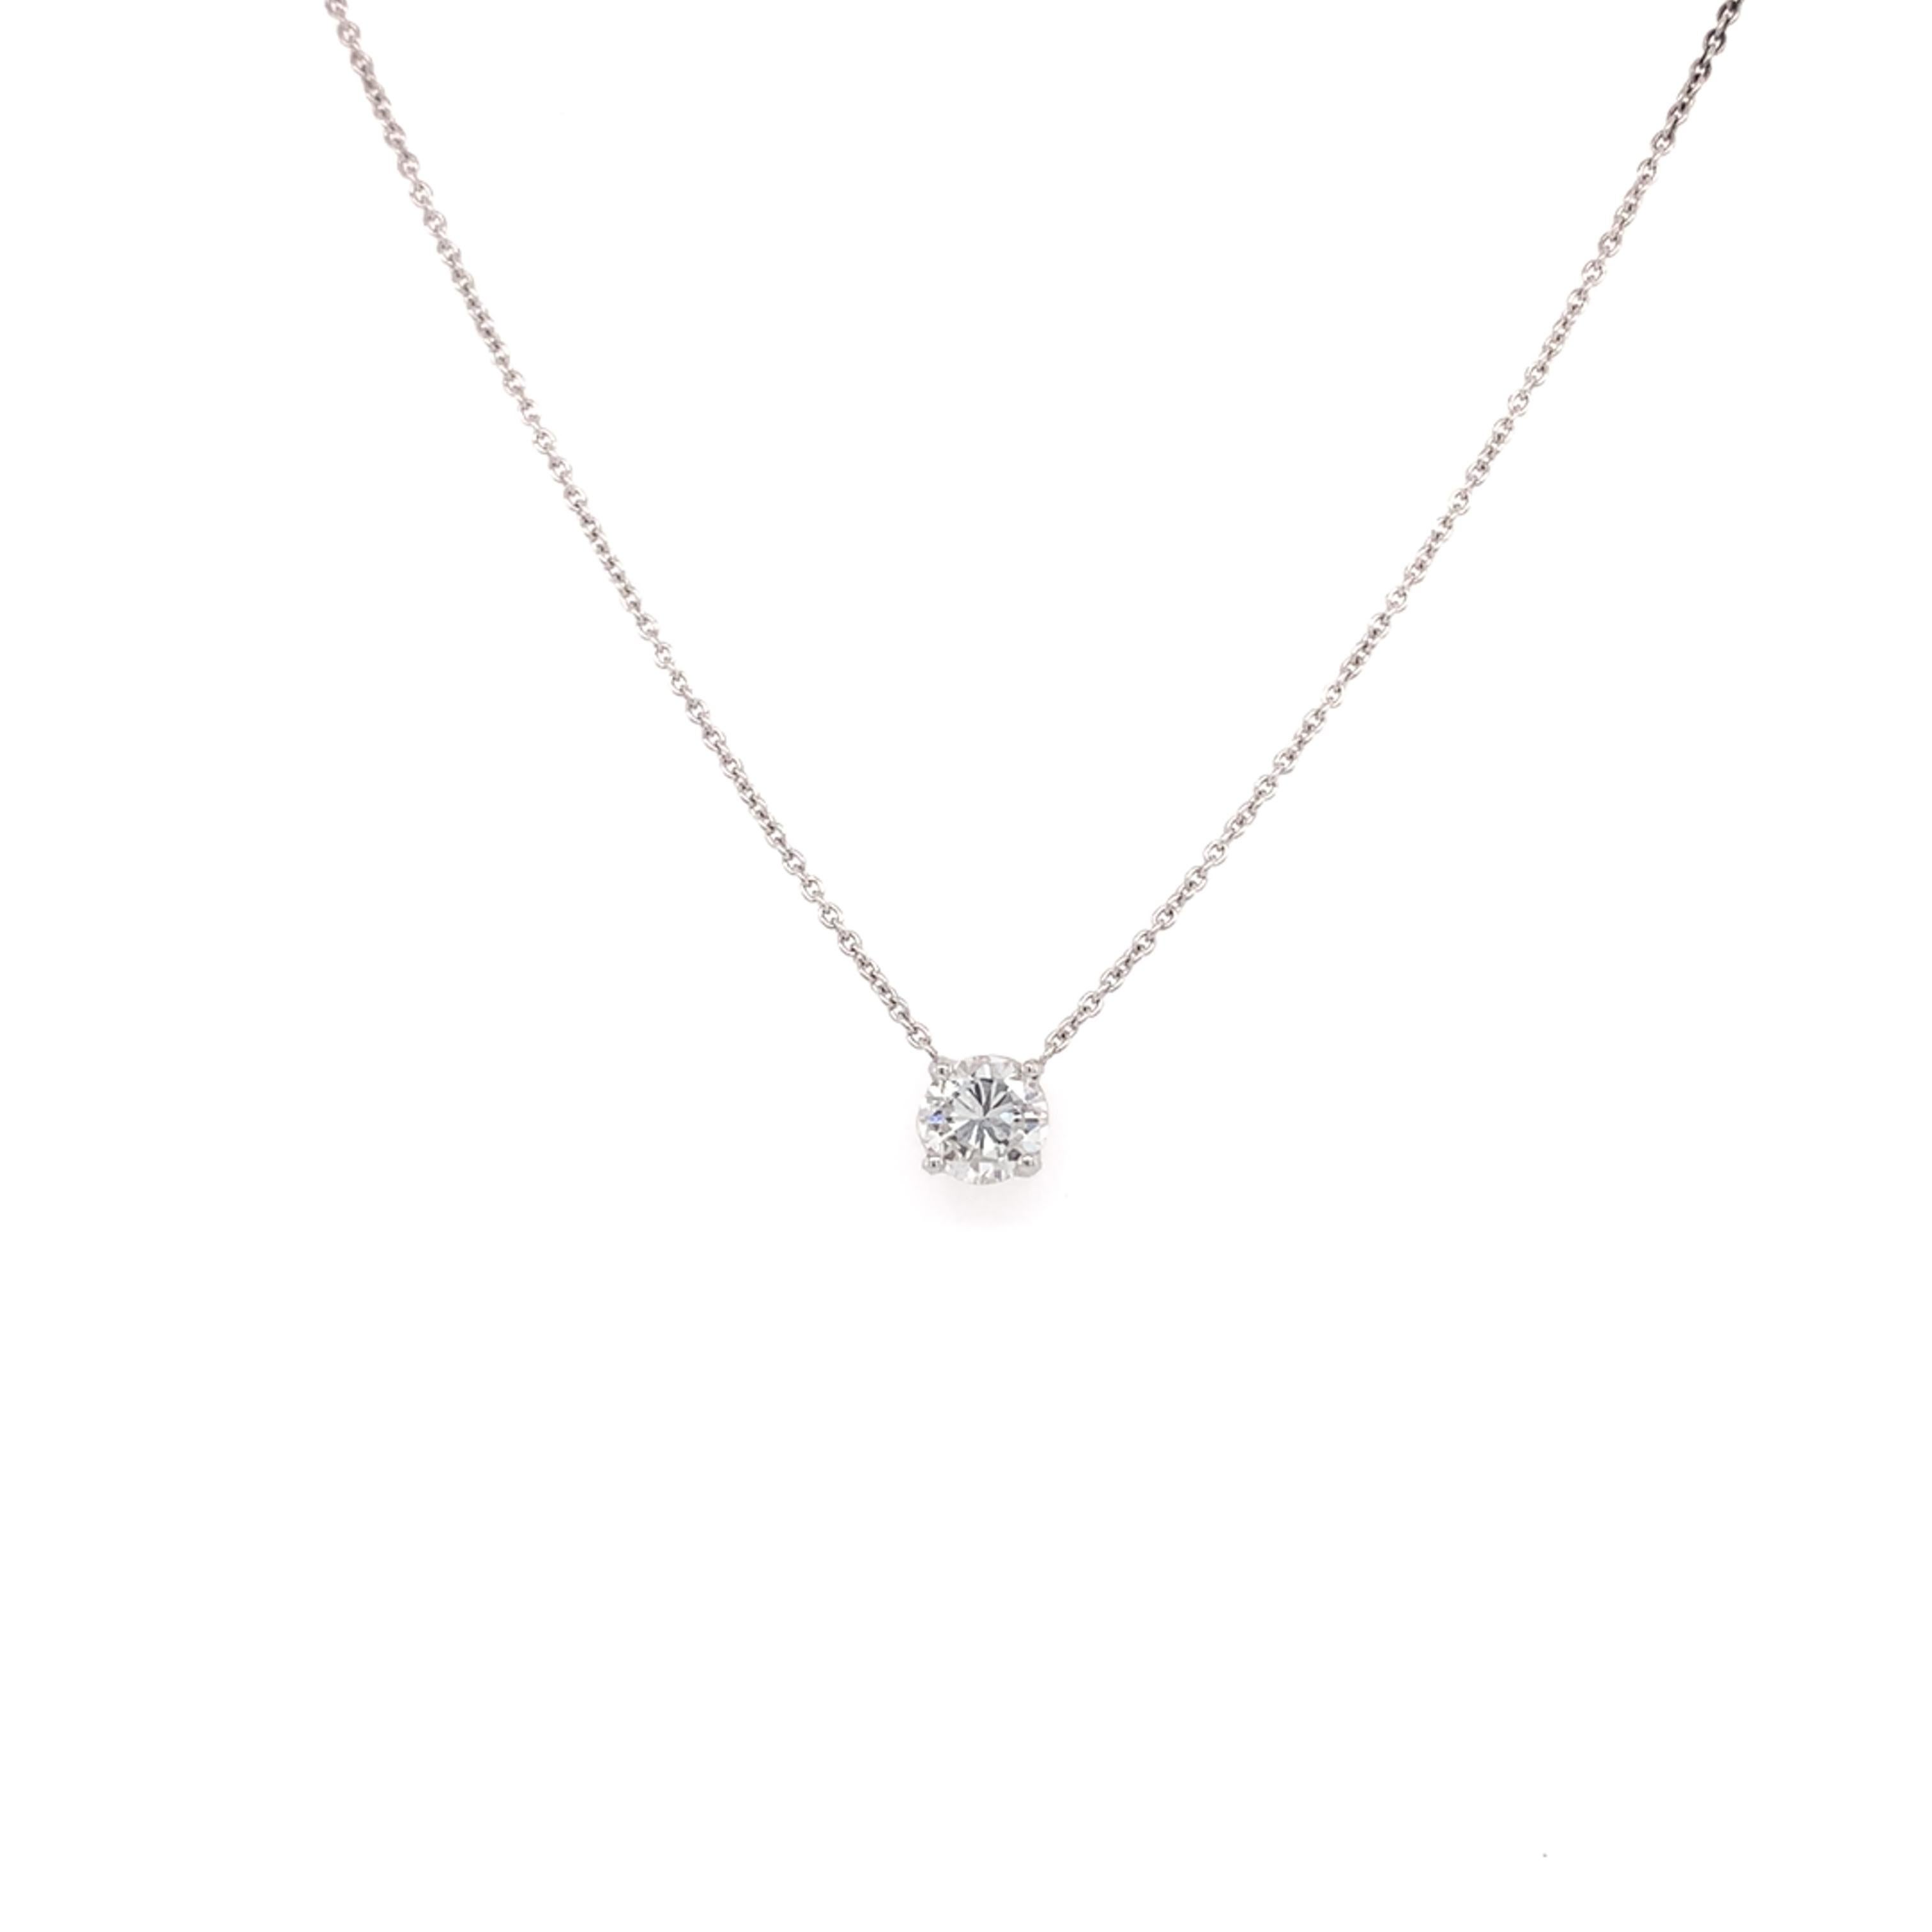 Solitaire Diamond Pendant made with real/natural brilliant cut diamonds. Total Diamond Weight: 0.47 carats. Diamond Quantity: 1 brilliant cut diamond. Diamond Color: G-H Diamond Clarity: SI2 Mounted on 18kt white gold, adjustable chain necklace. 